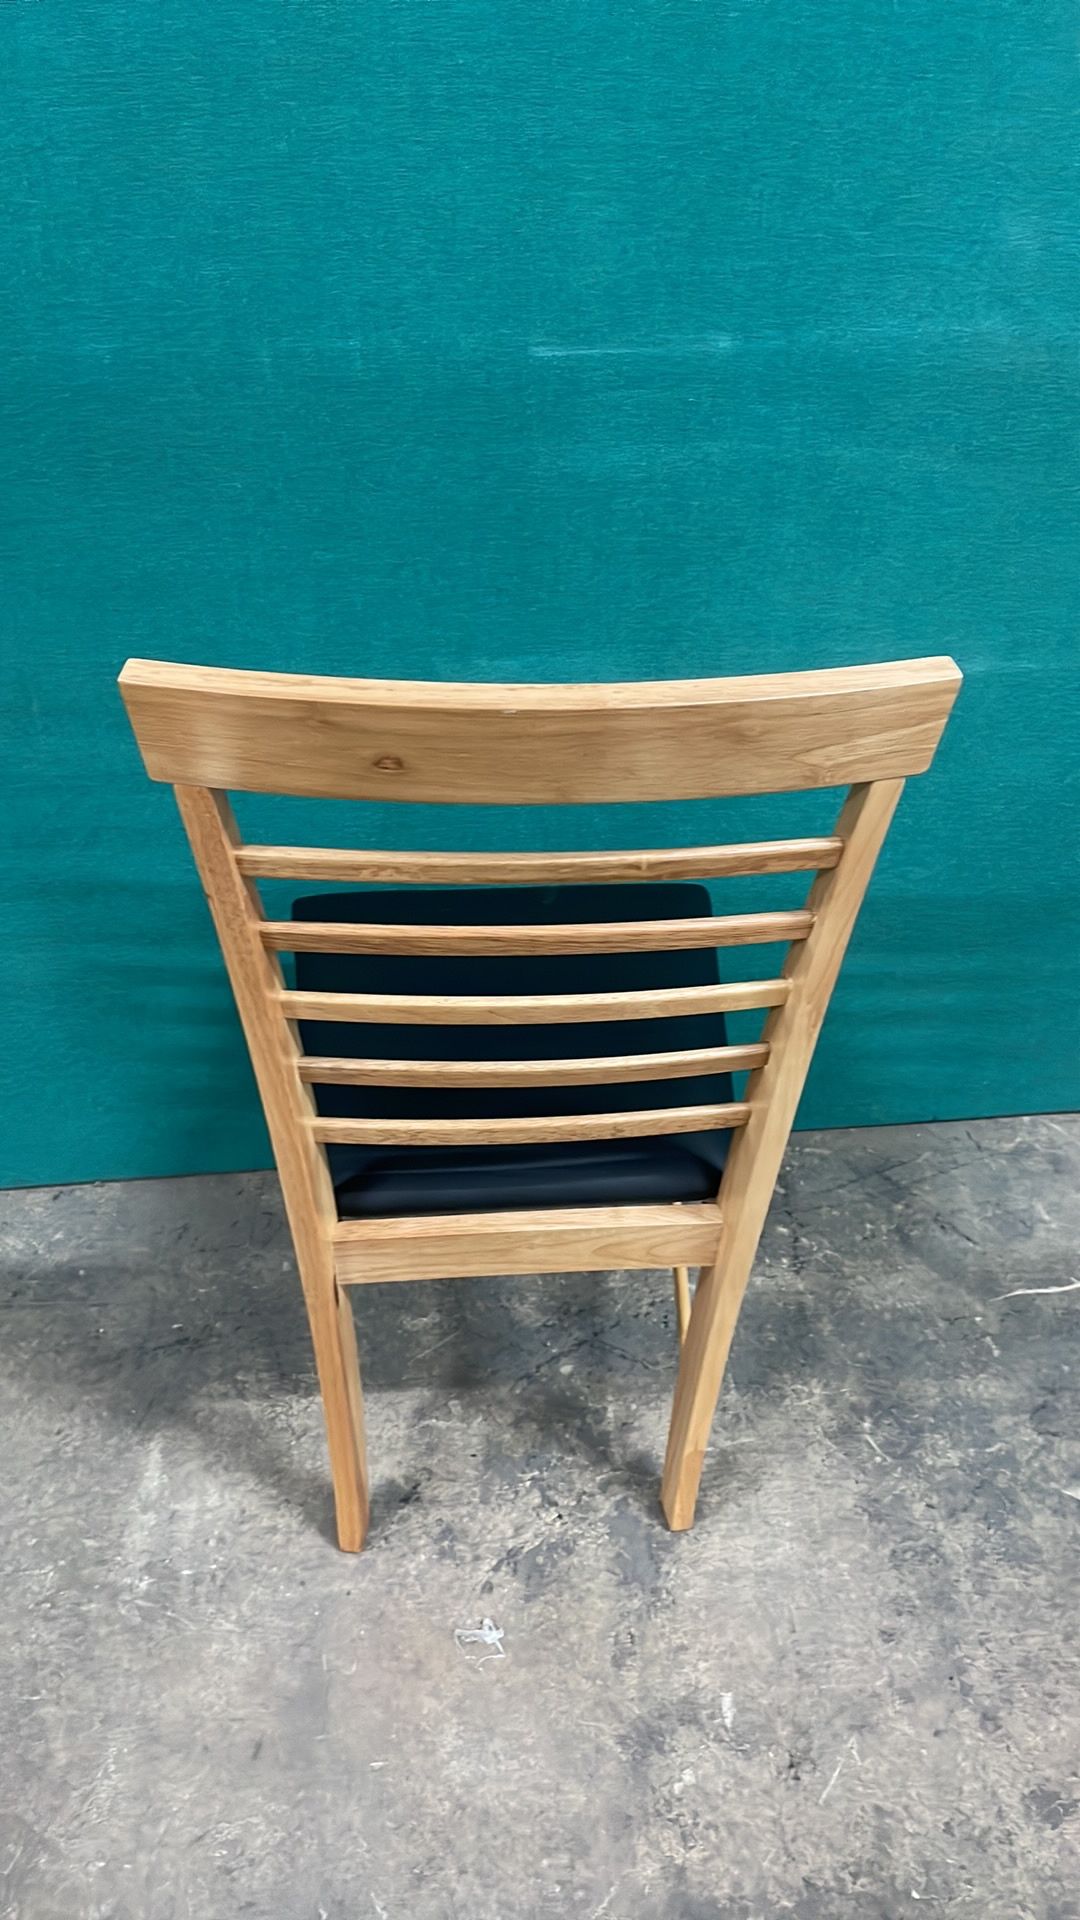 5 x Hanover Chairs Solid Beech - Image 4 of 4